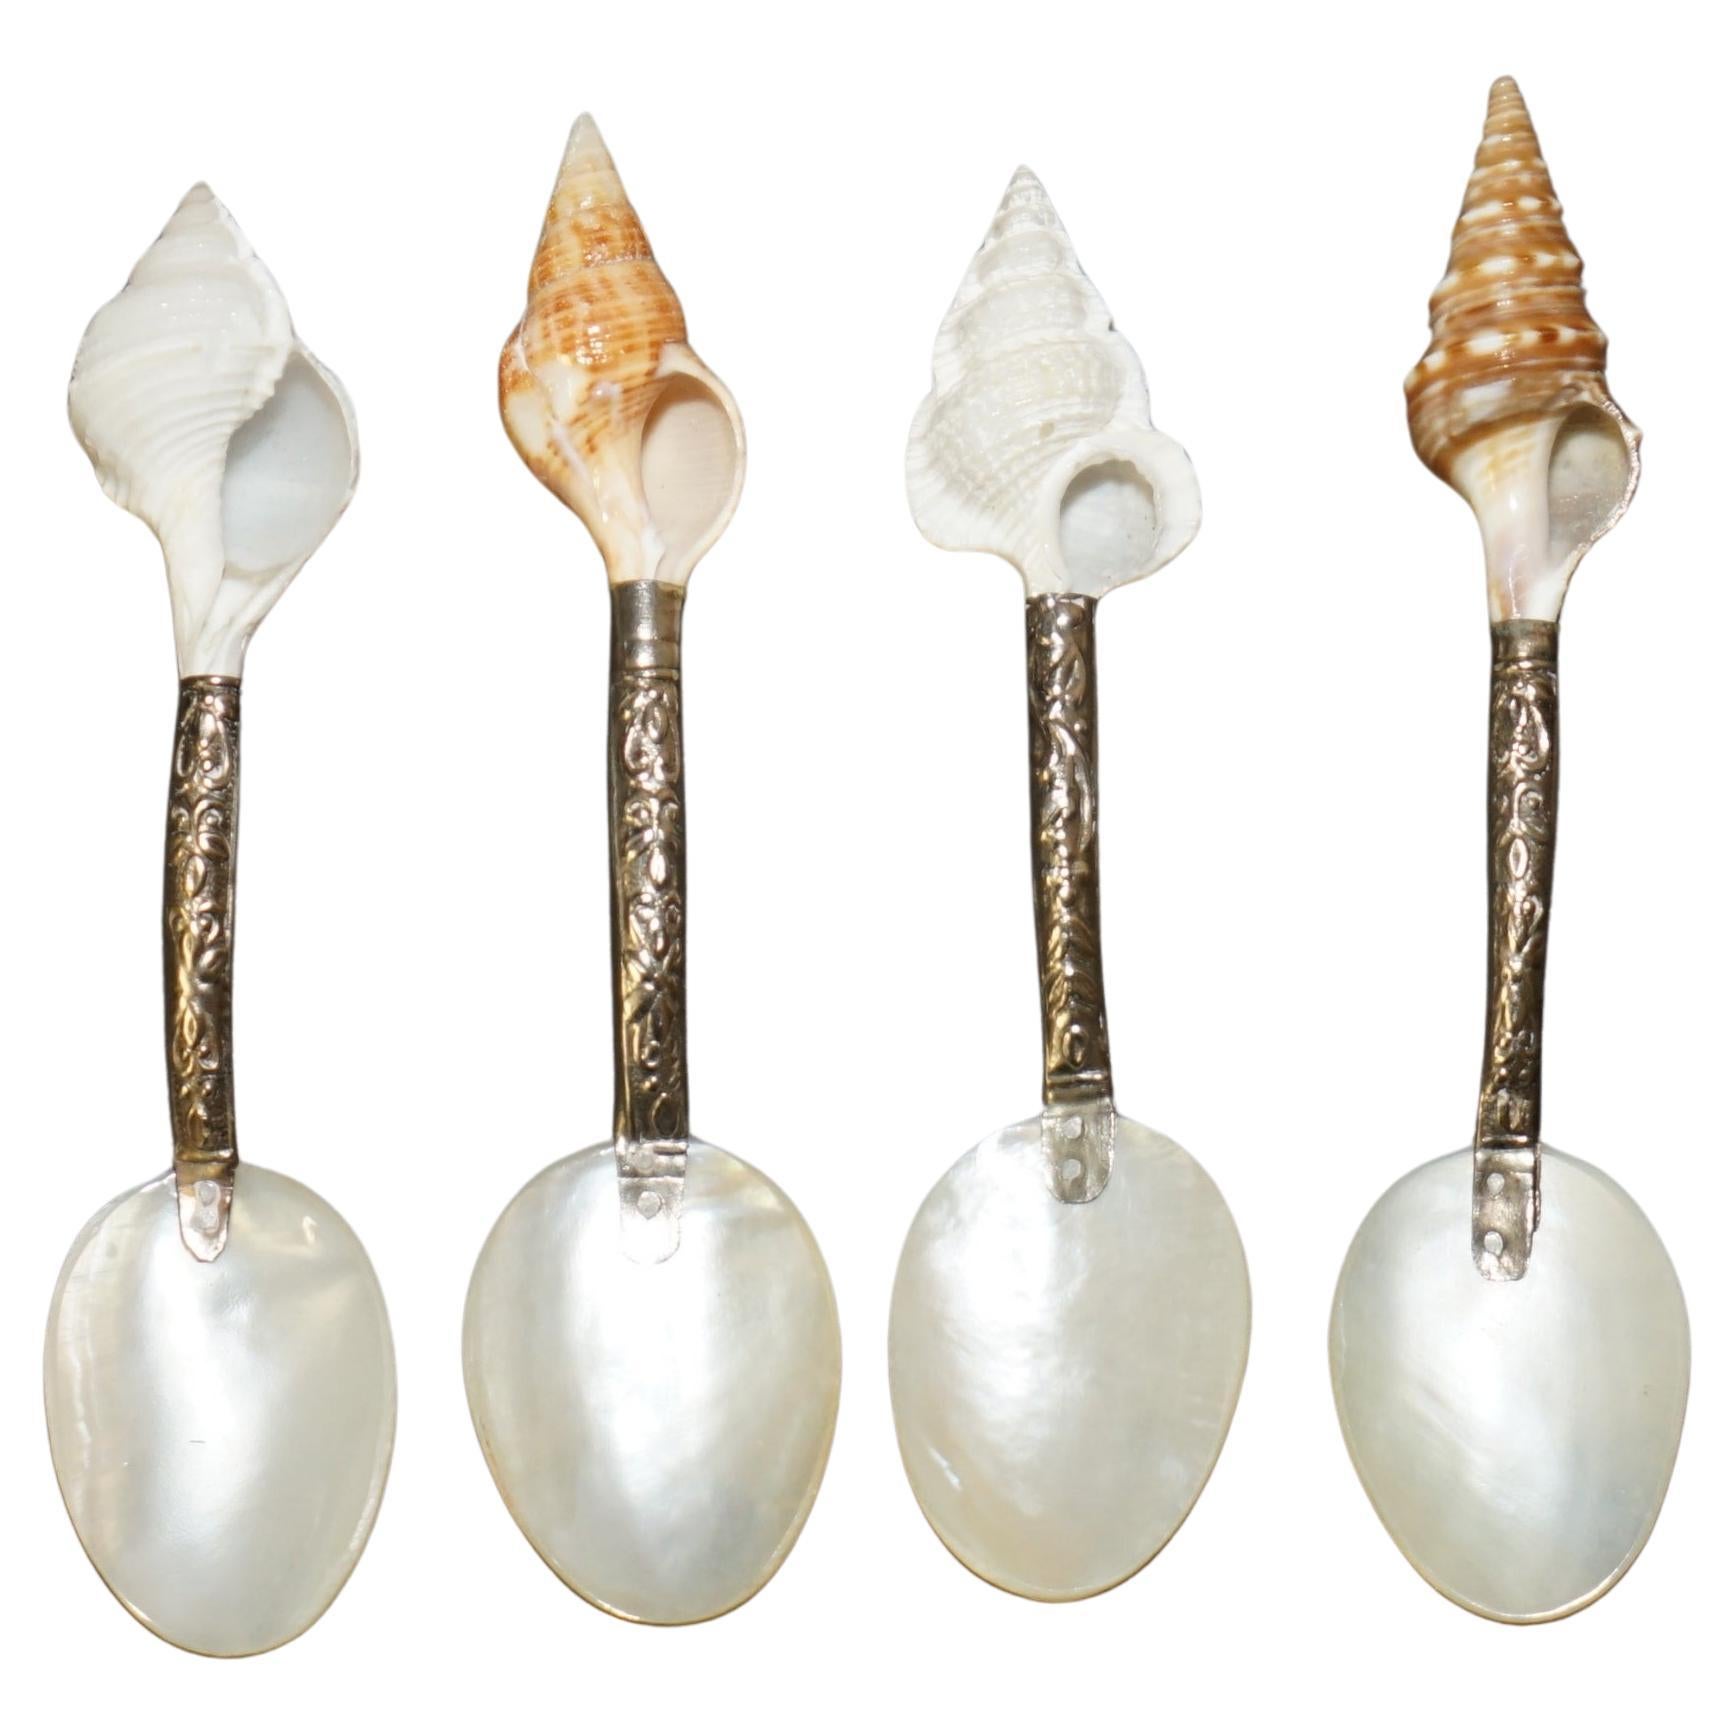 What is a mother of pearl spoon?